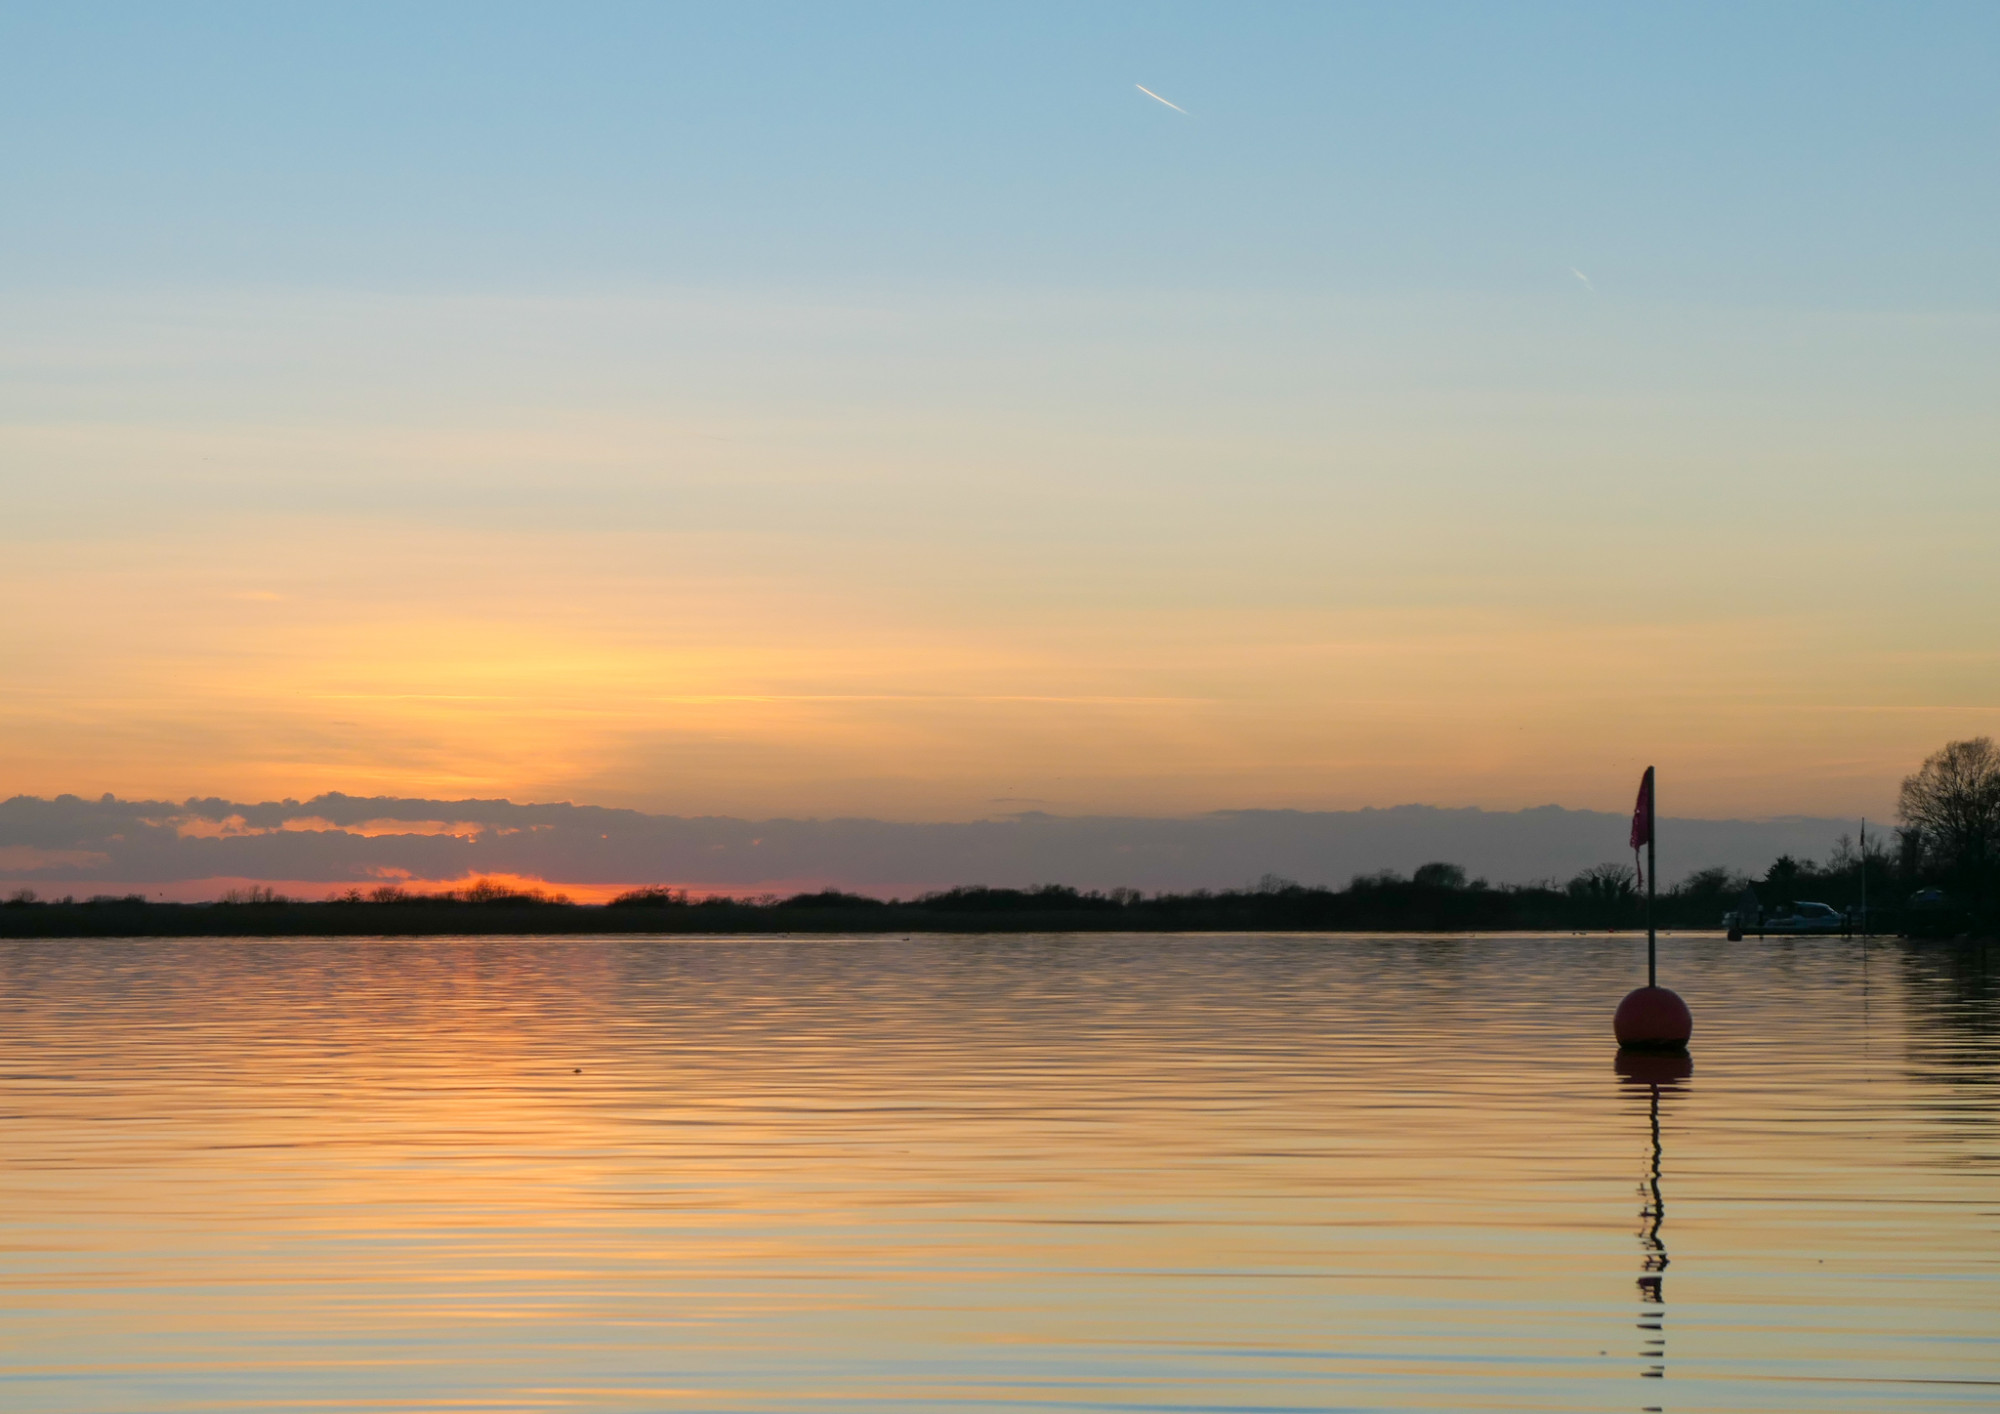 Oulton Broad. This photo was taken at sunset at Oulton Broad.